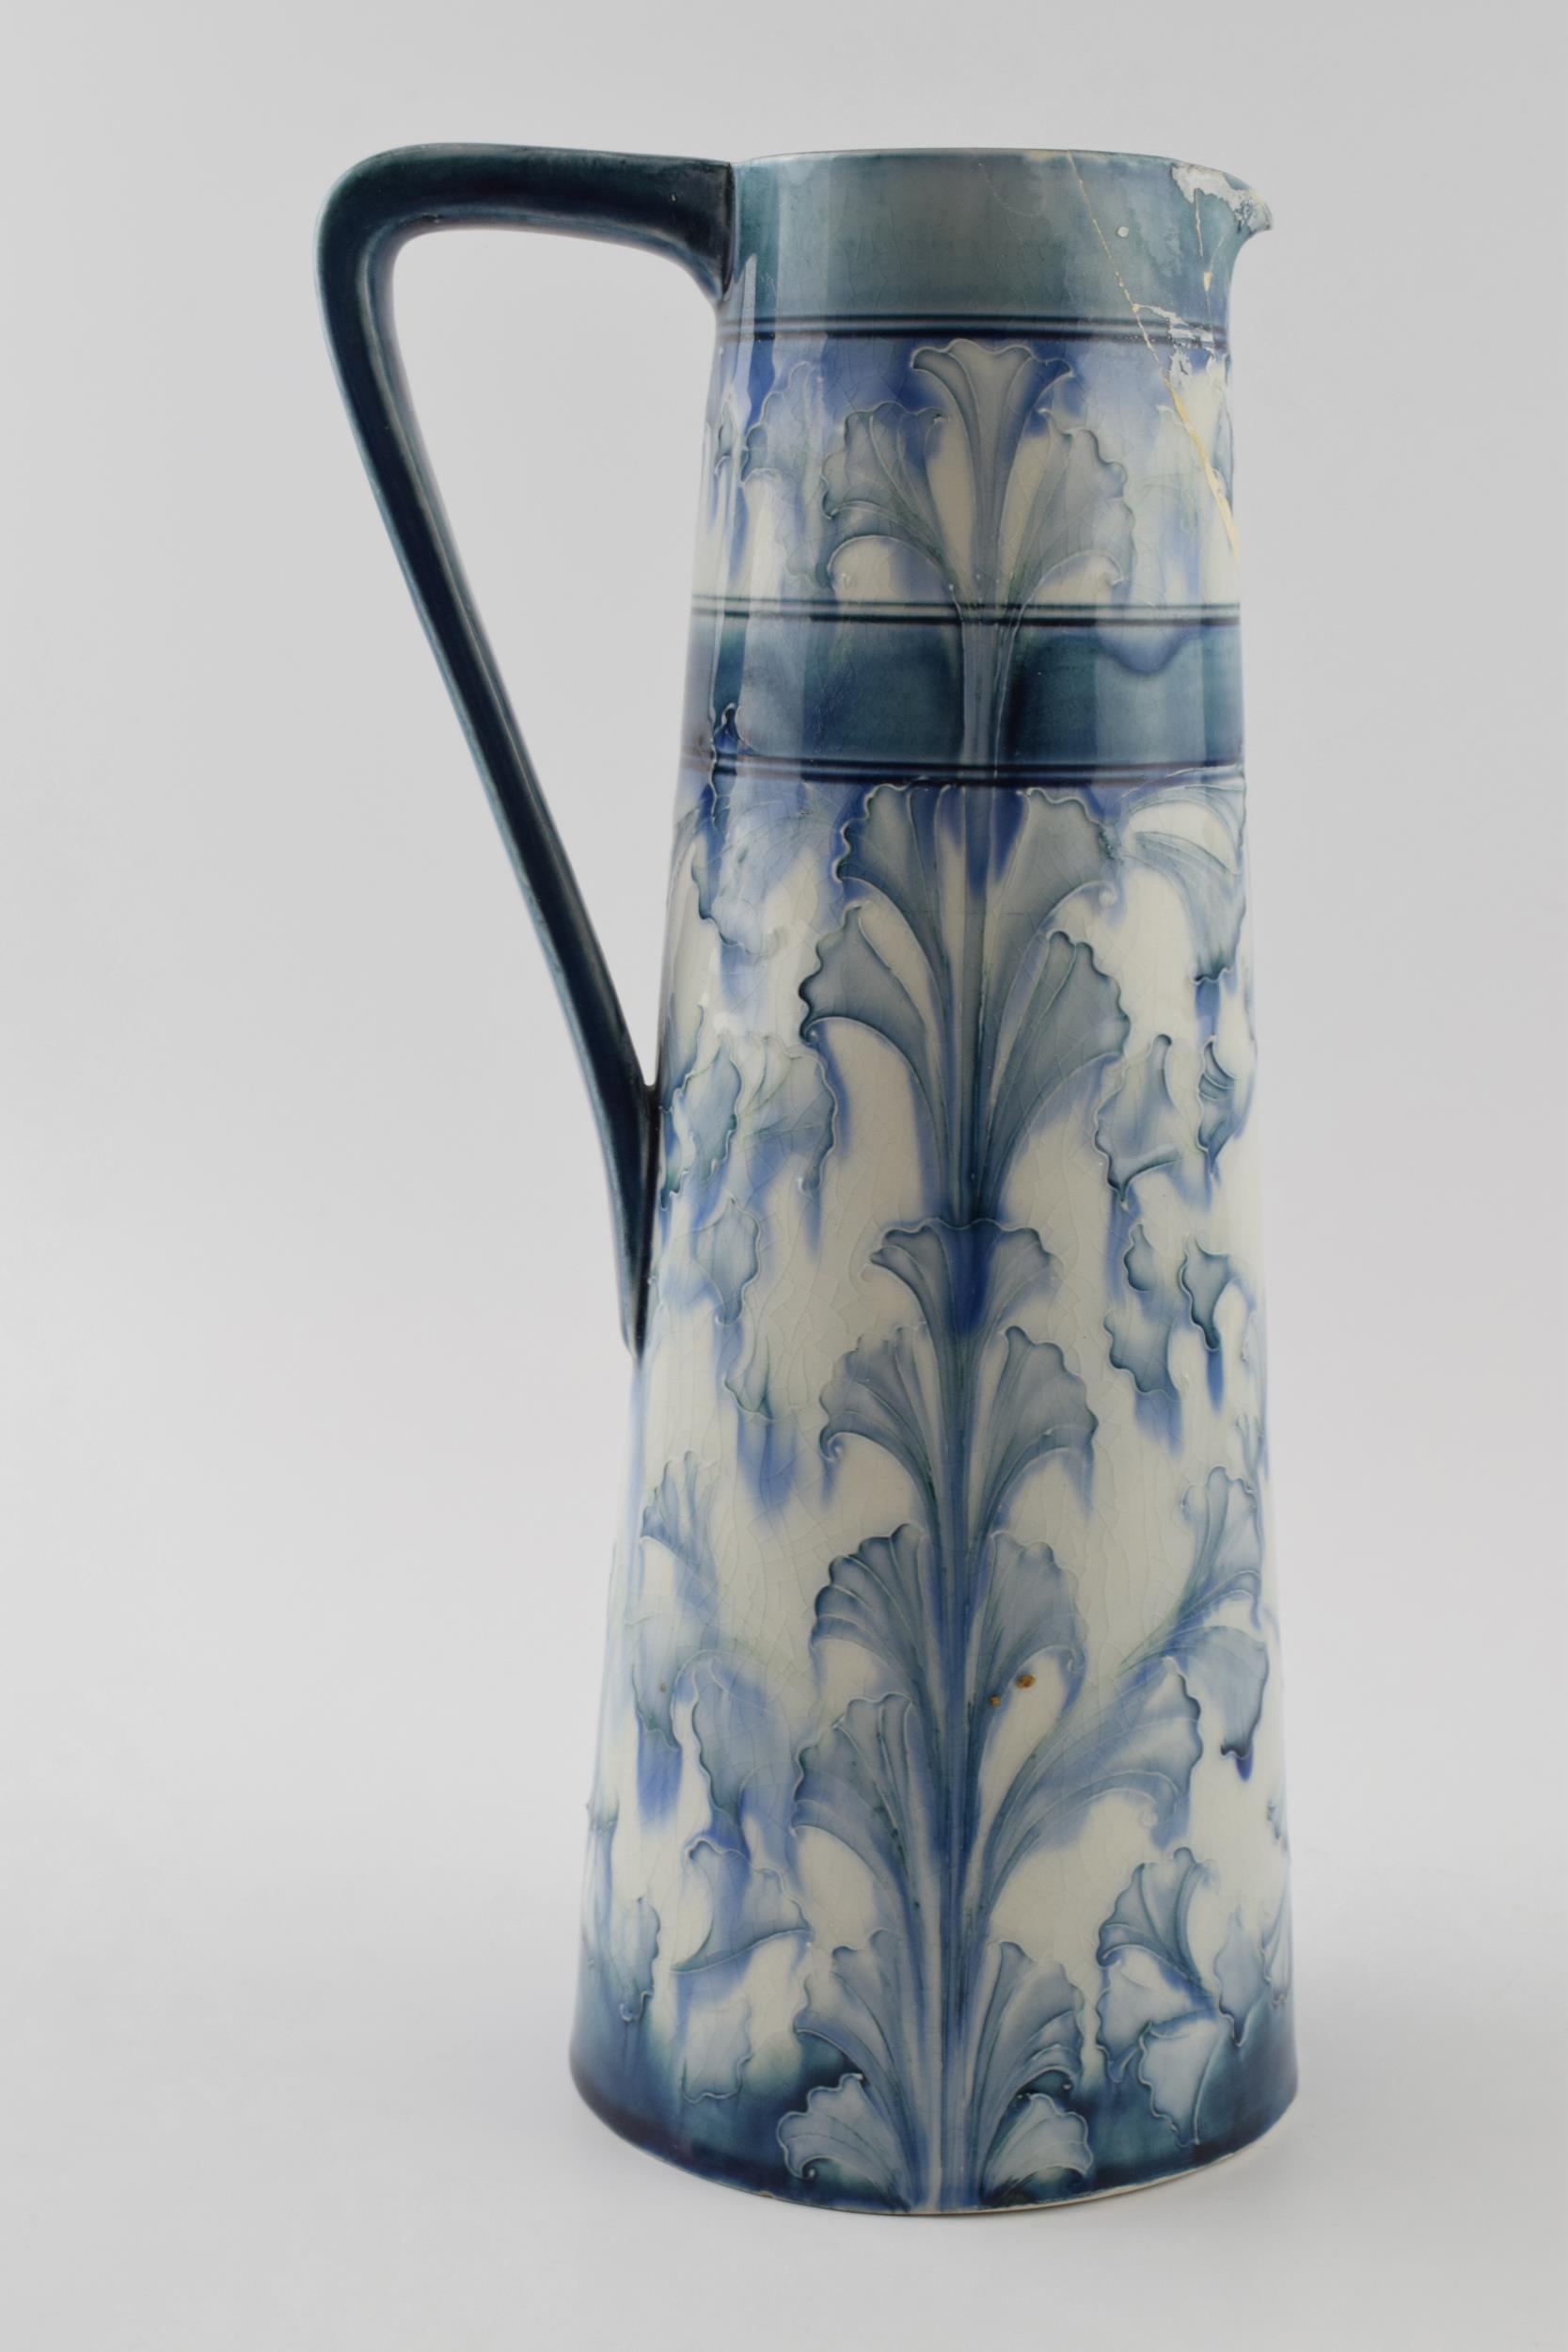 Early Moorcroft blue and white Florian pitcher, 28cm tall (restoration project). - Image 4 of 7